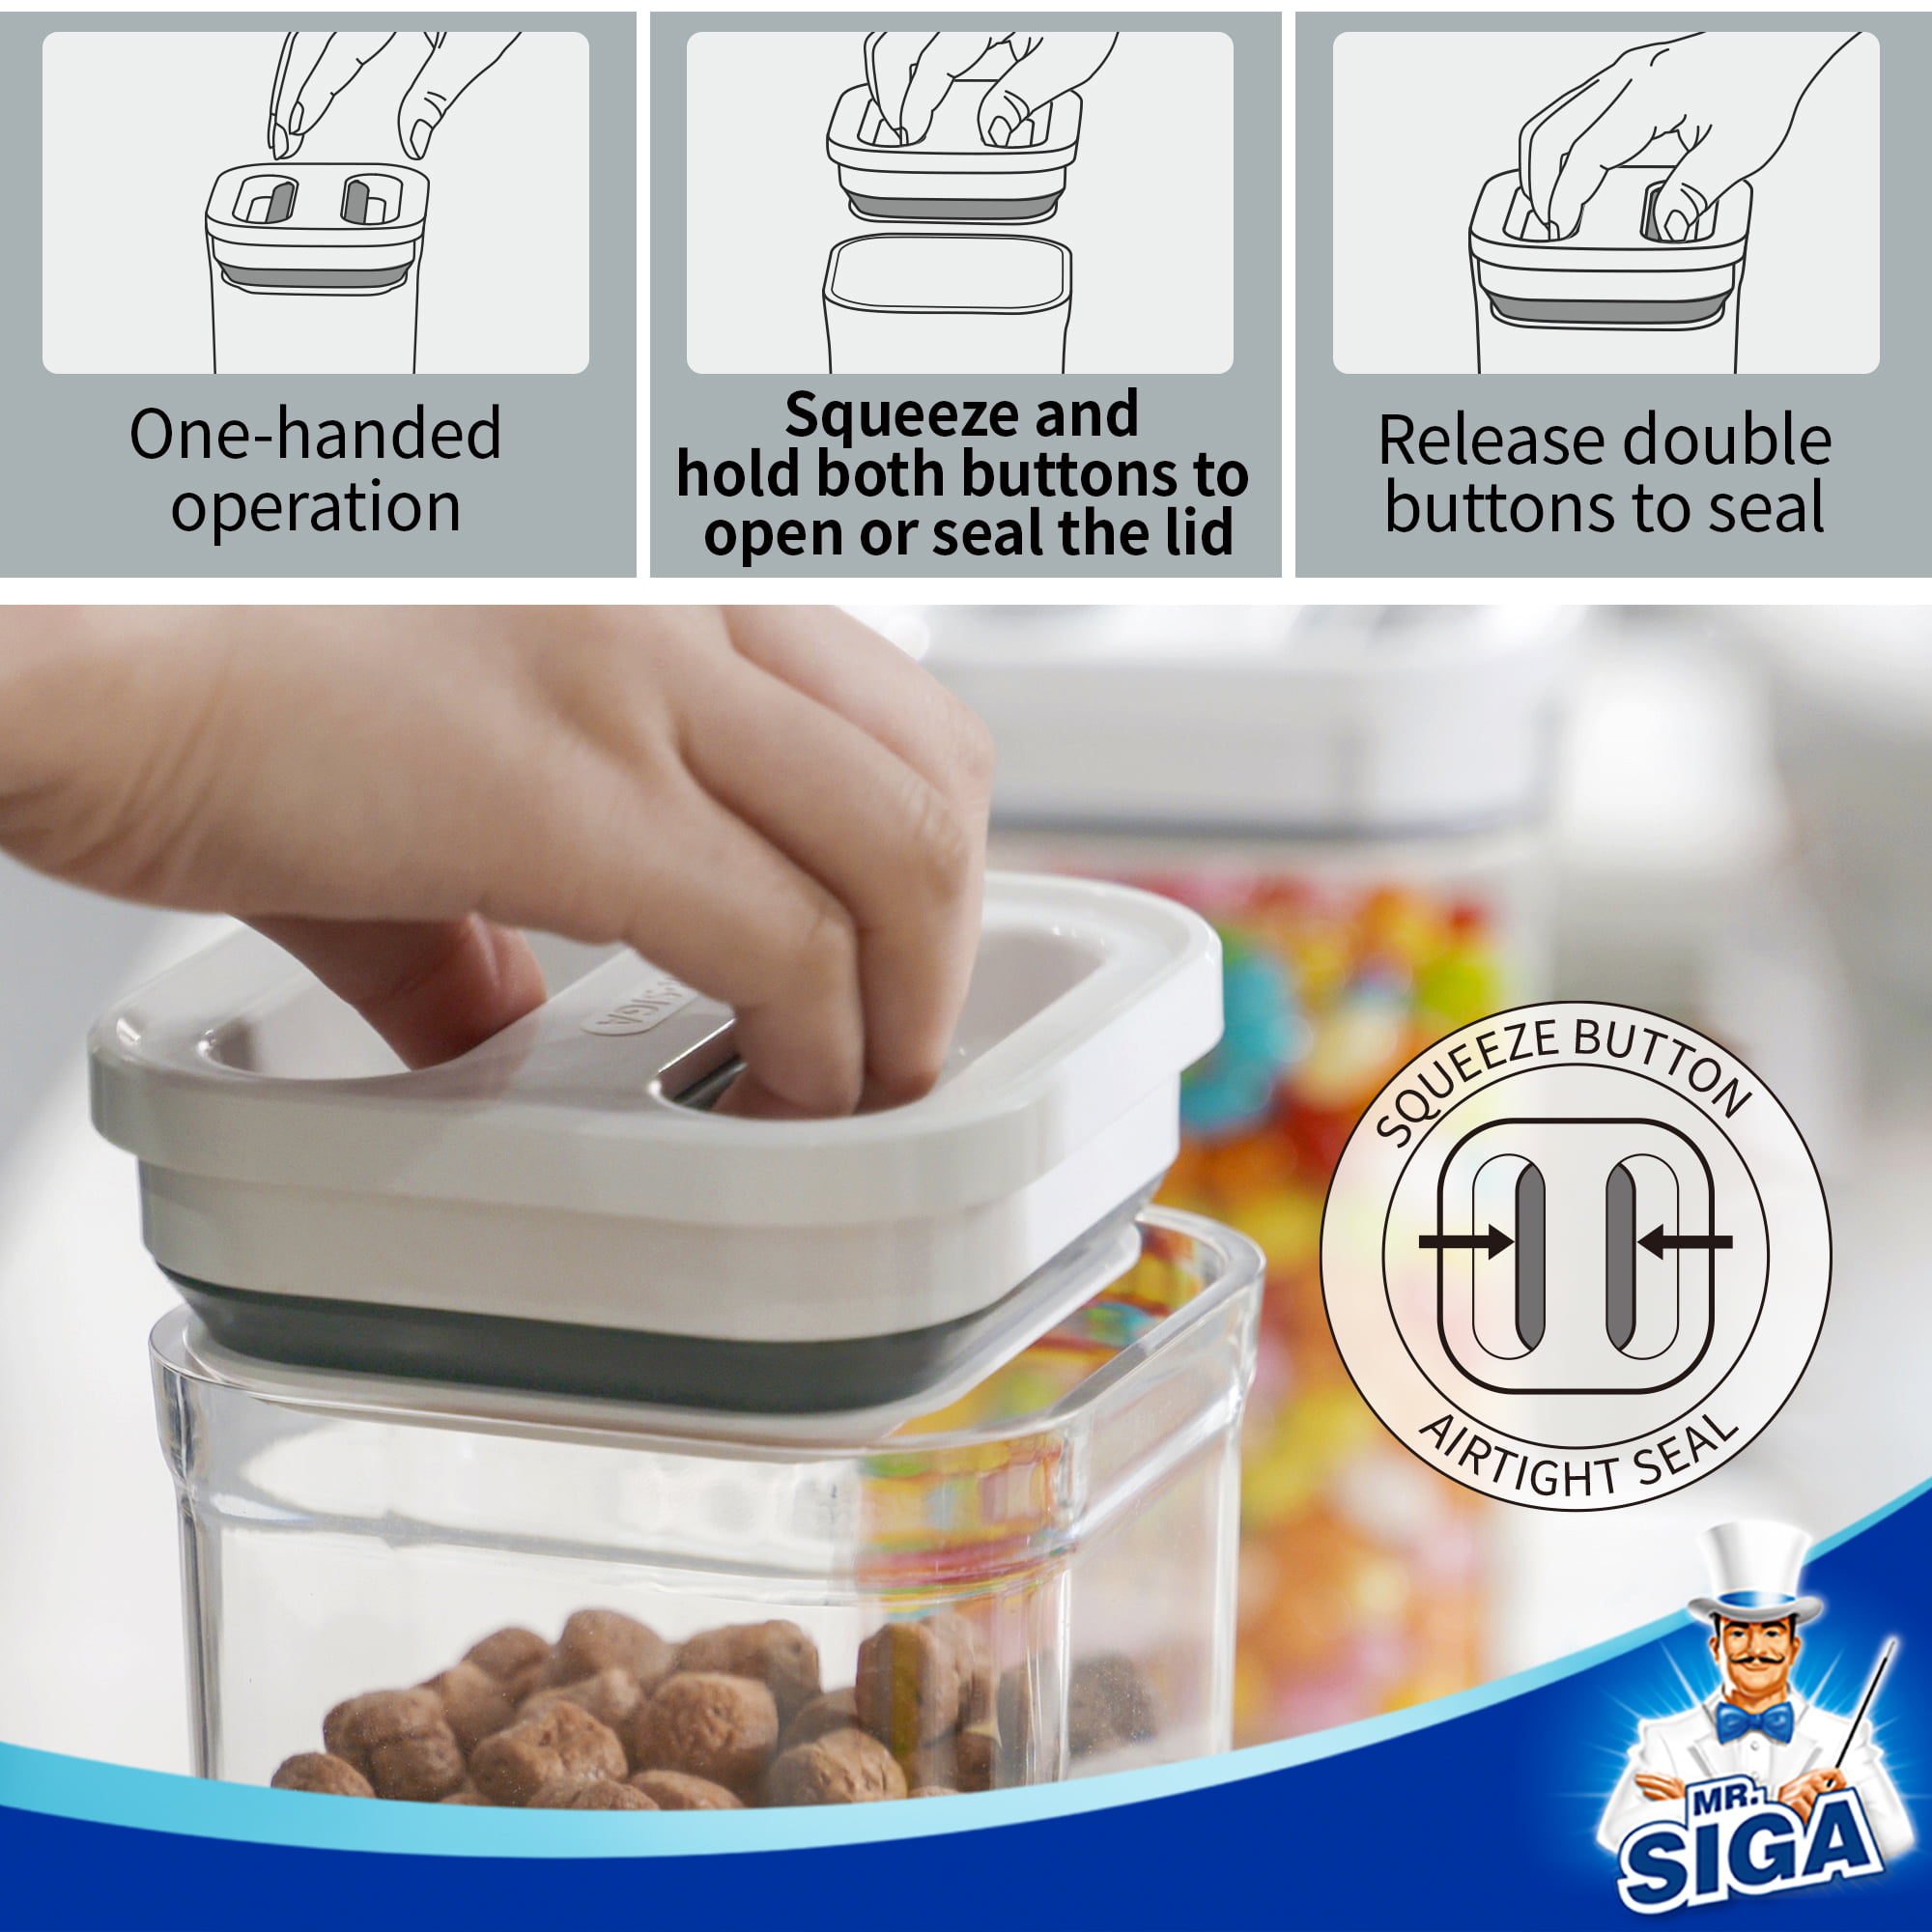 Introducing the MR.SIGA 4 Pack Airtight Food Storage Container Set – Your  Pantry's New Best Friend! 